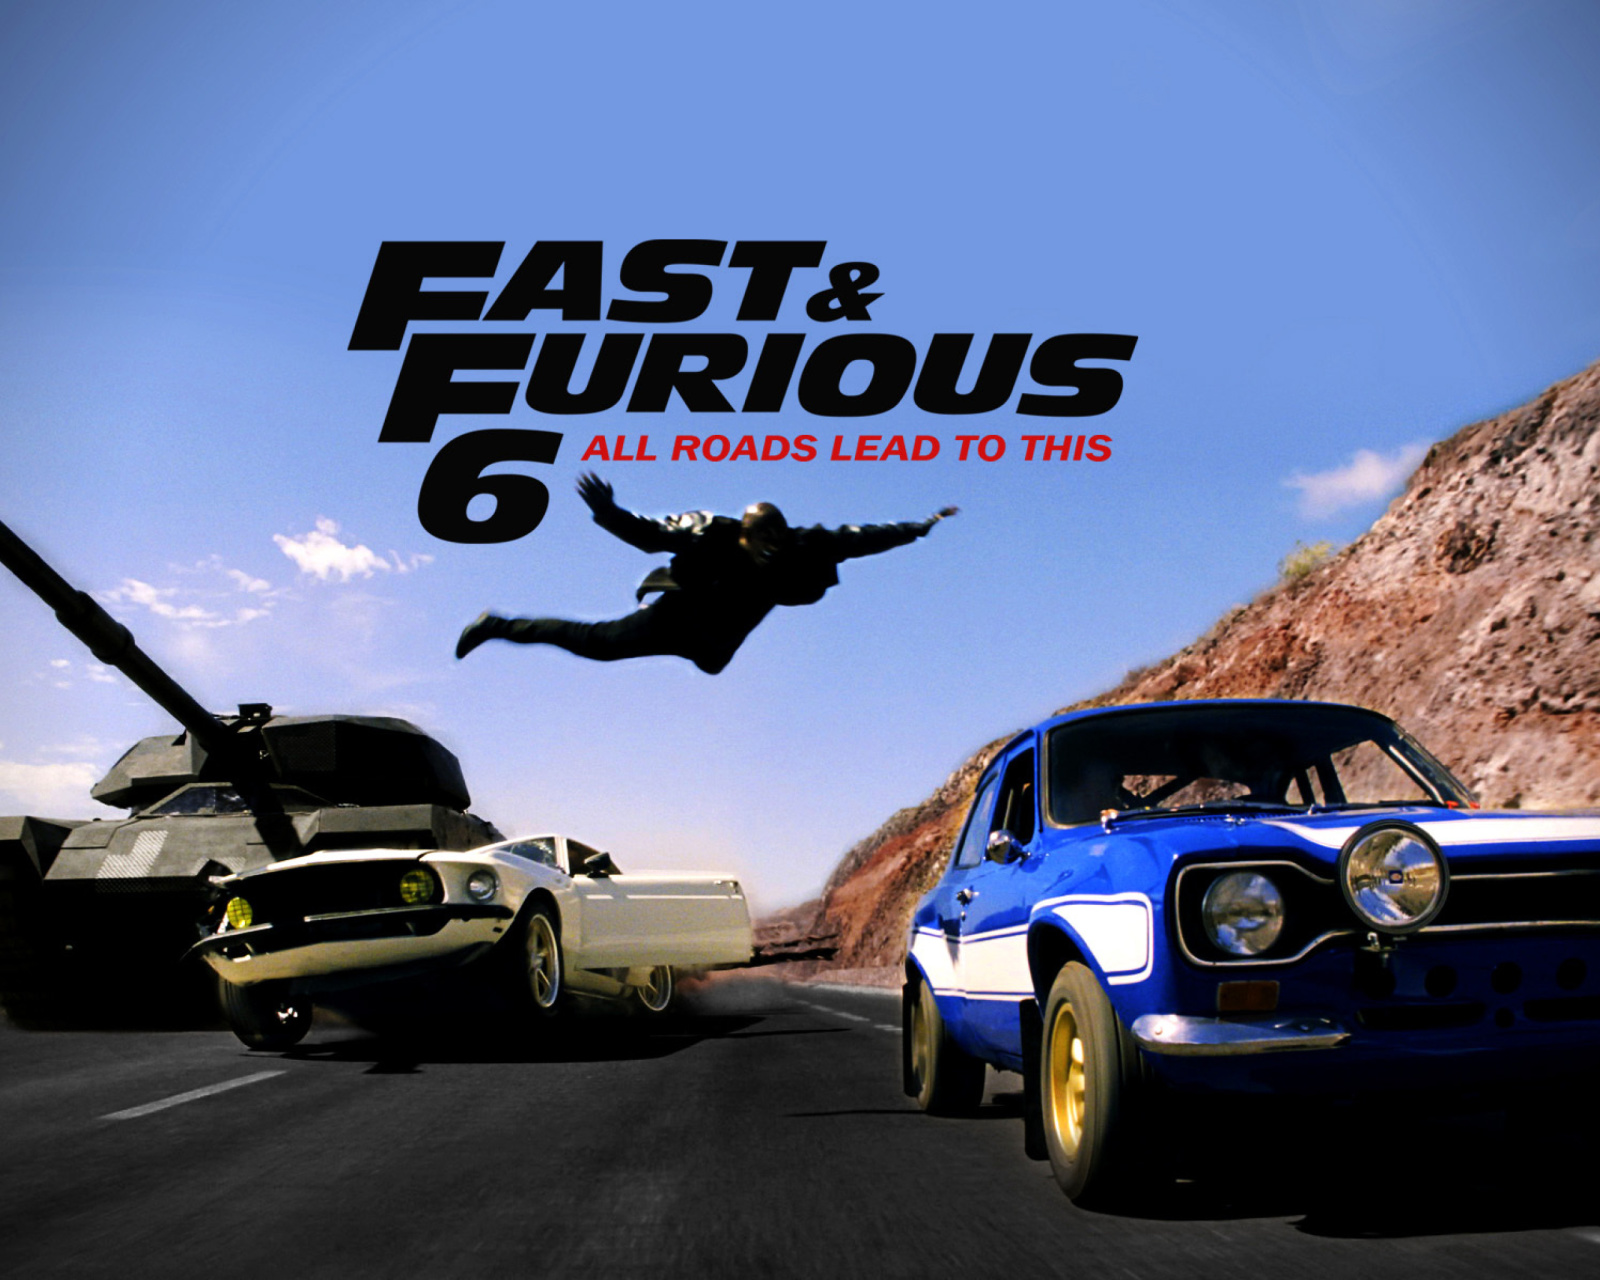 Fast and furious 6 Trailer wallpaper 1600x1280